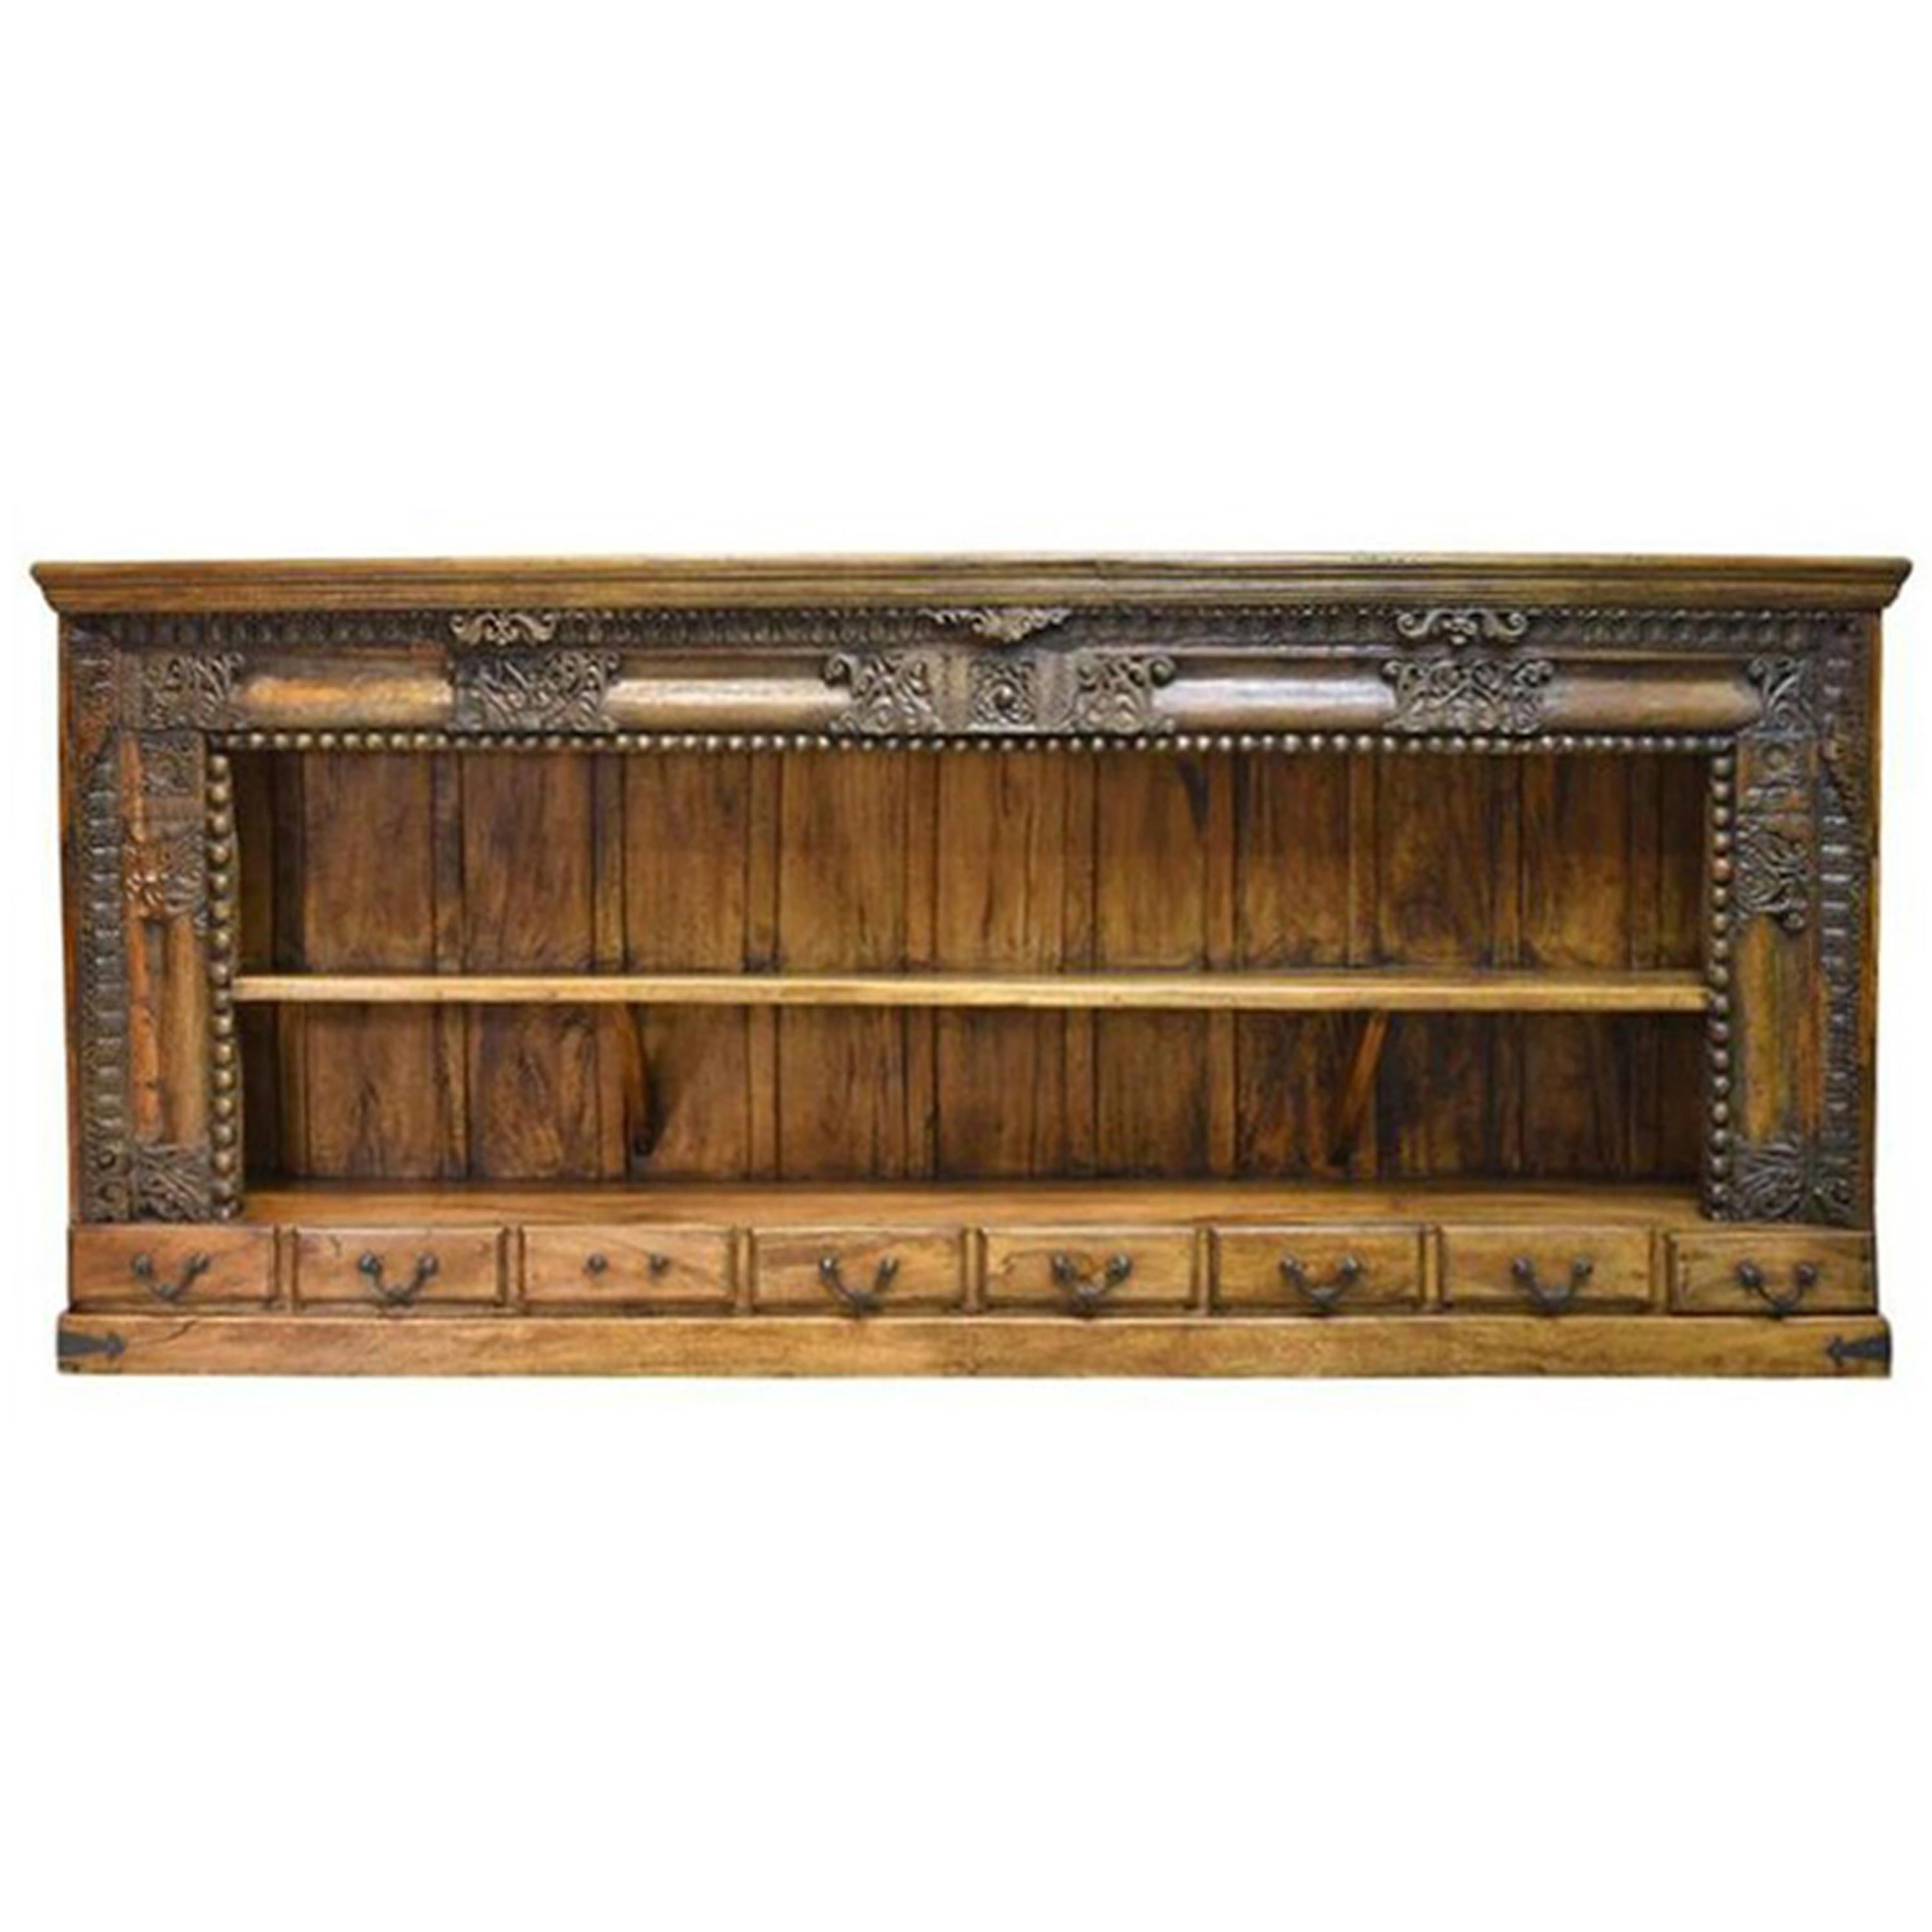 20th Century Long Open Asian Bookcase in Teak with Carved Foliage and Flowers